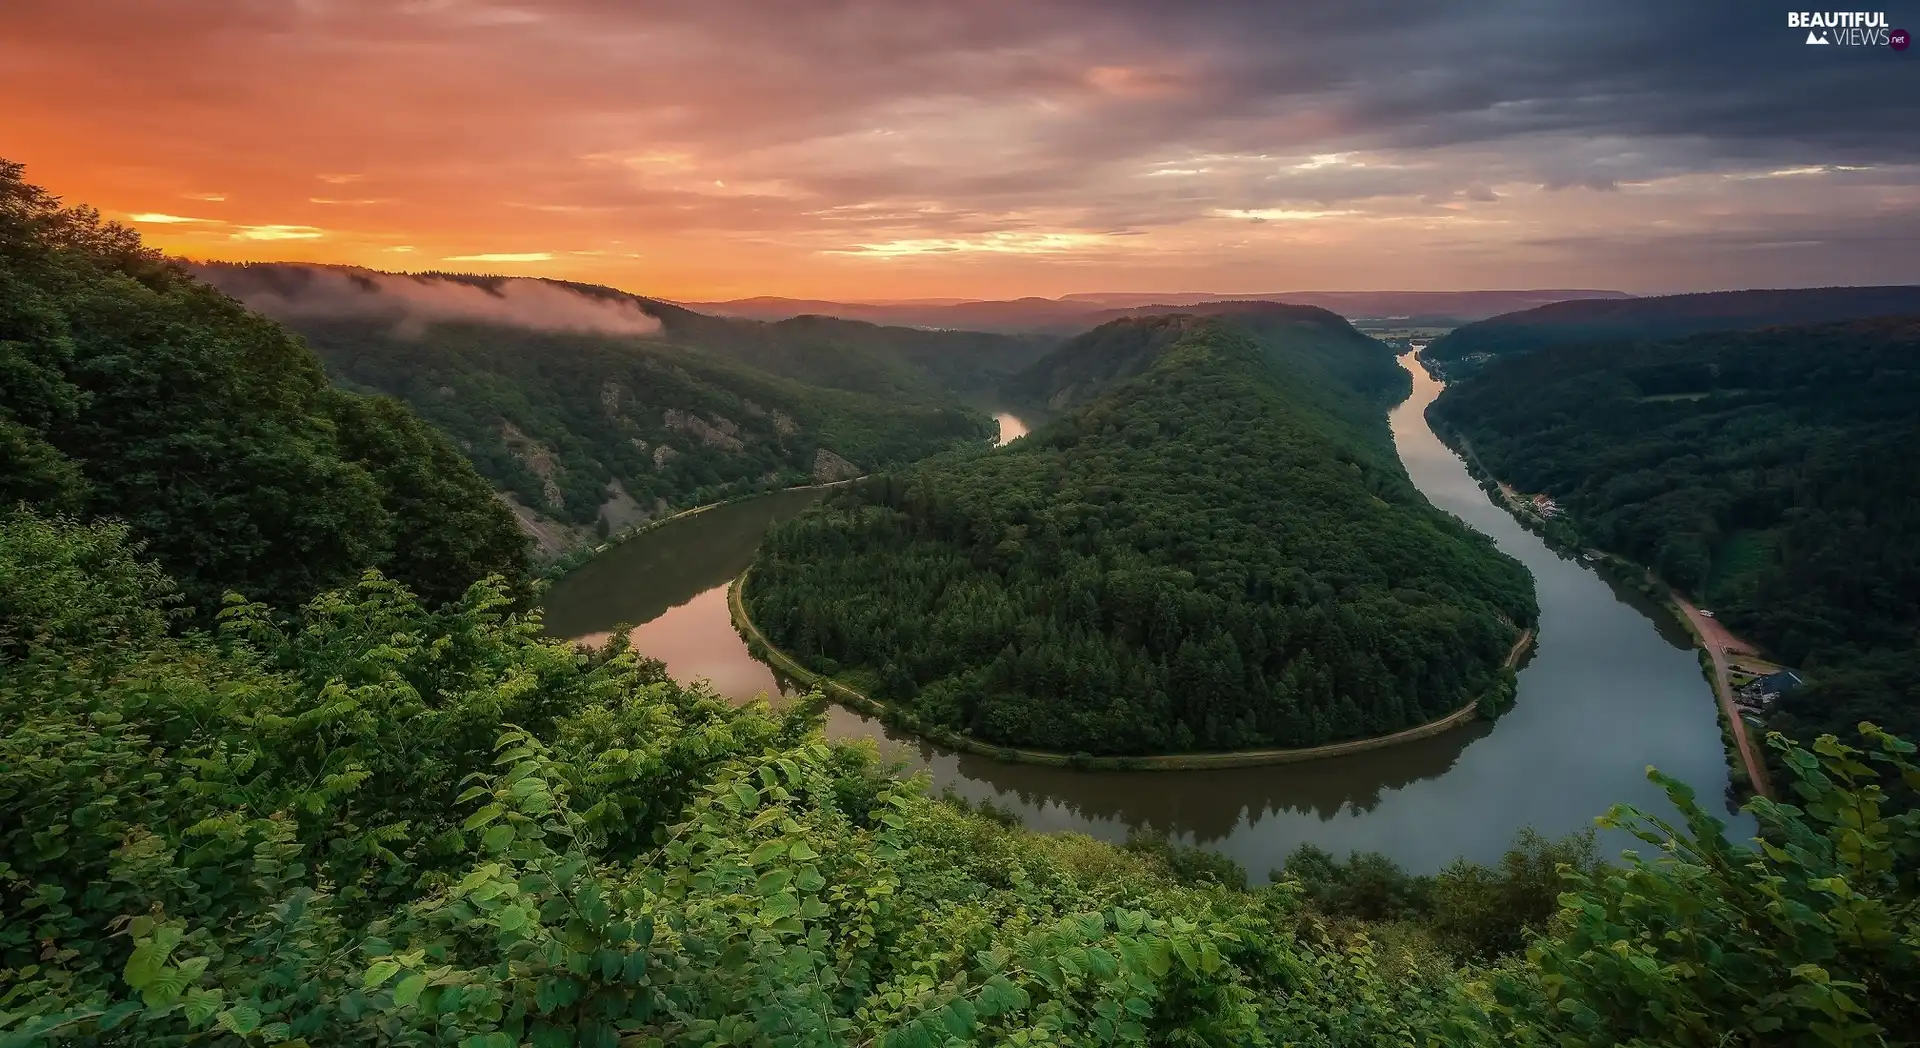 River Saar, curve, Great Sunsets, Meandro del Sarre, viewes, Mettlach, Germany, trees